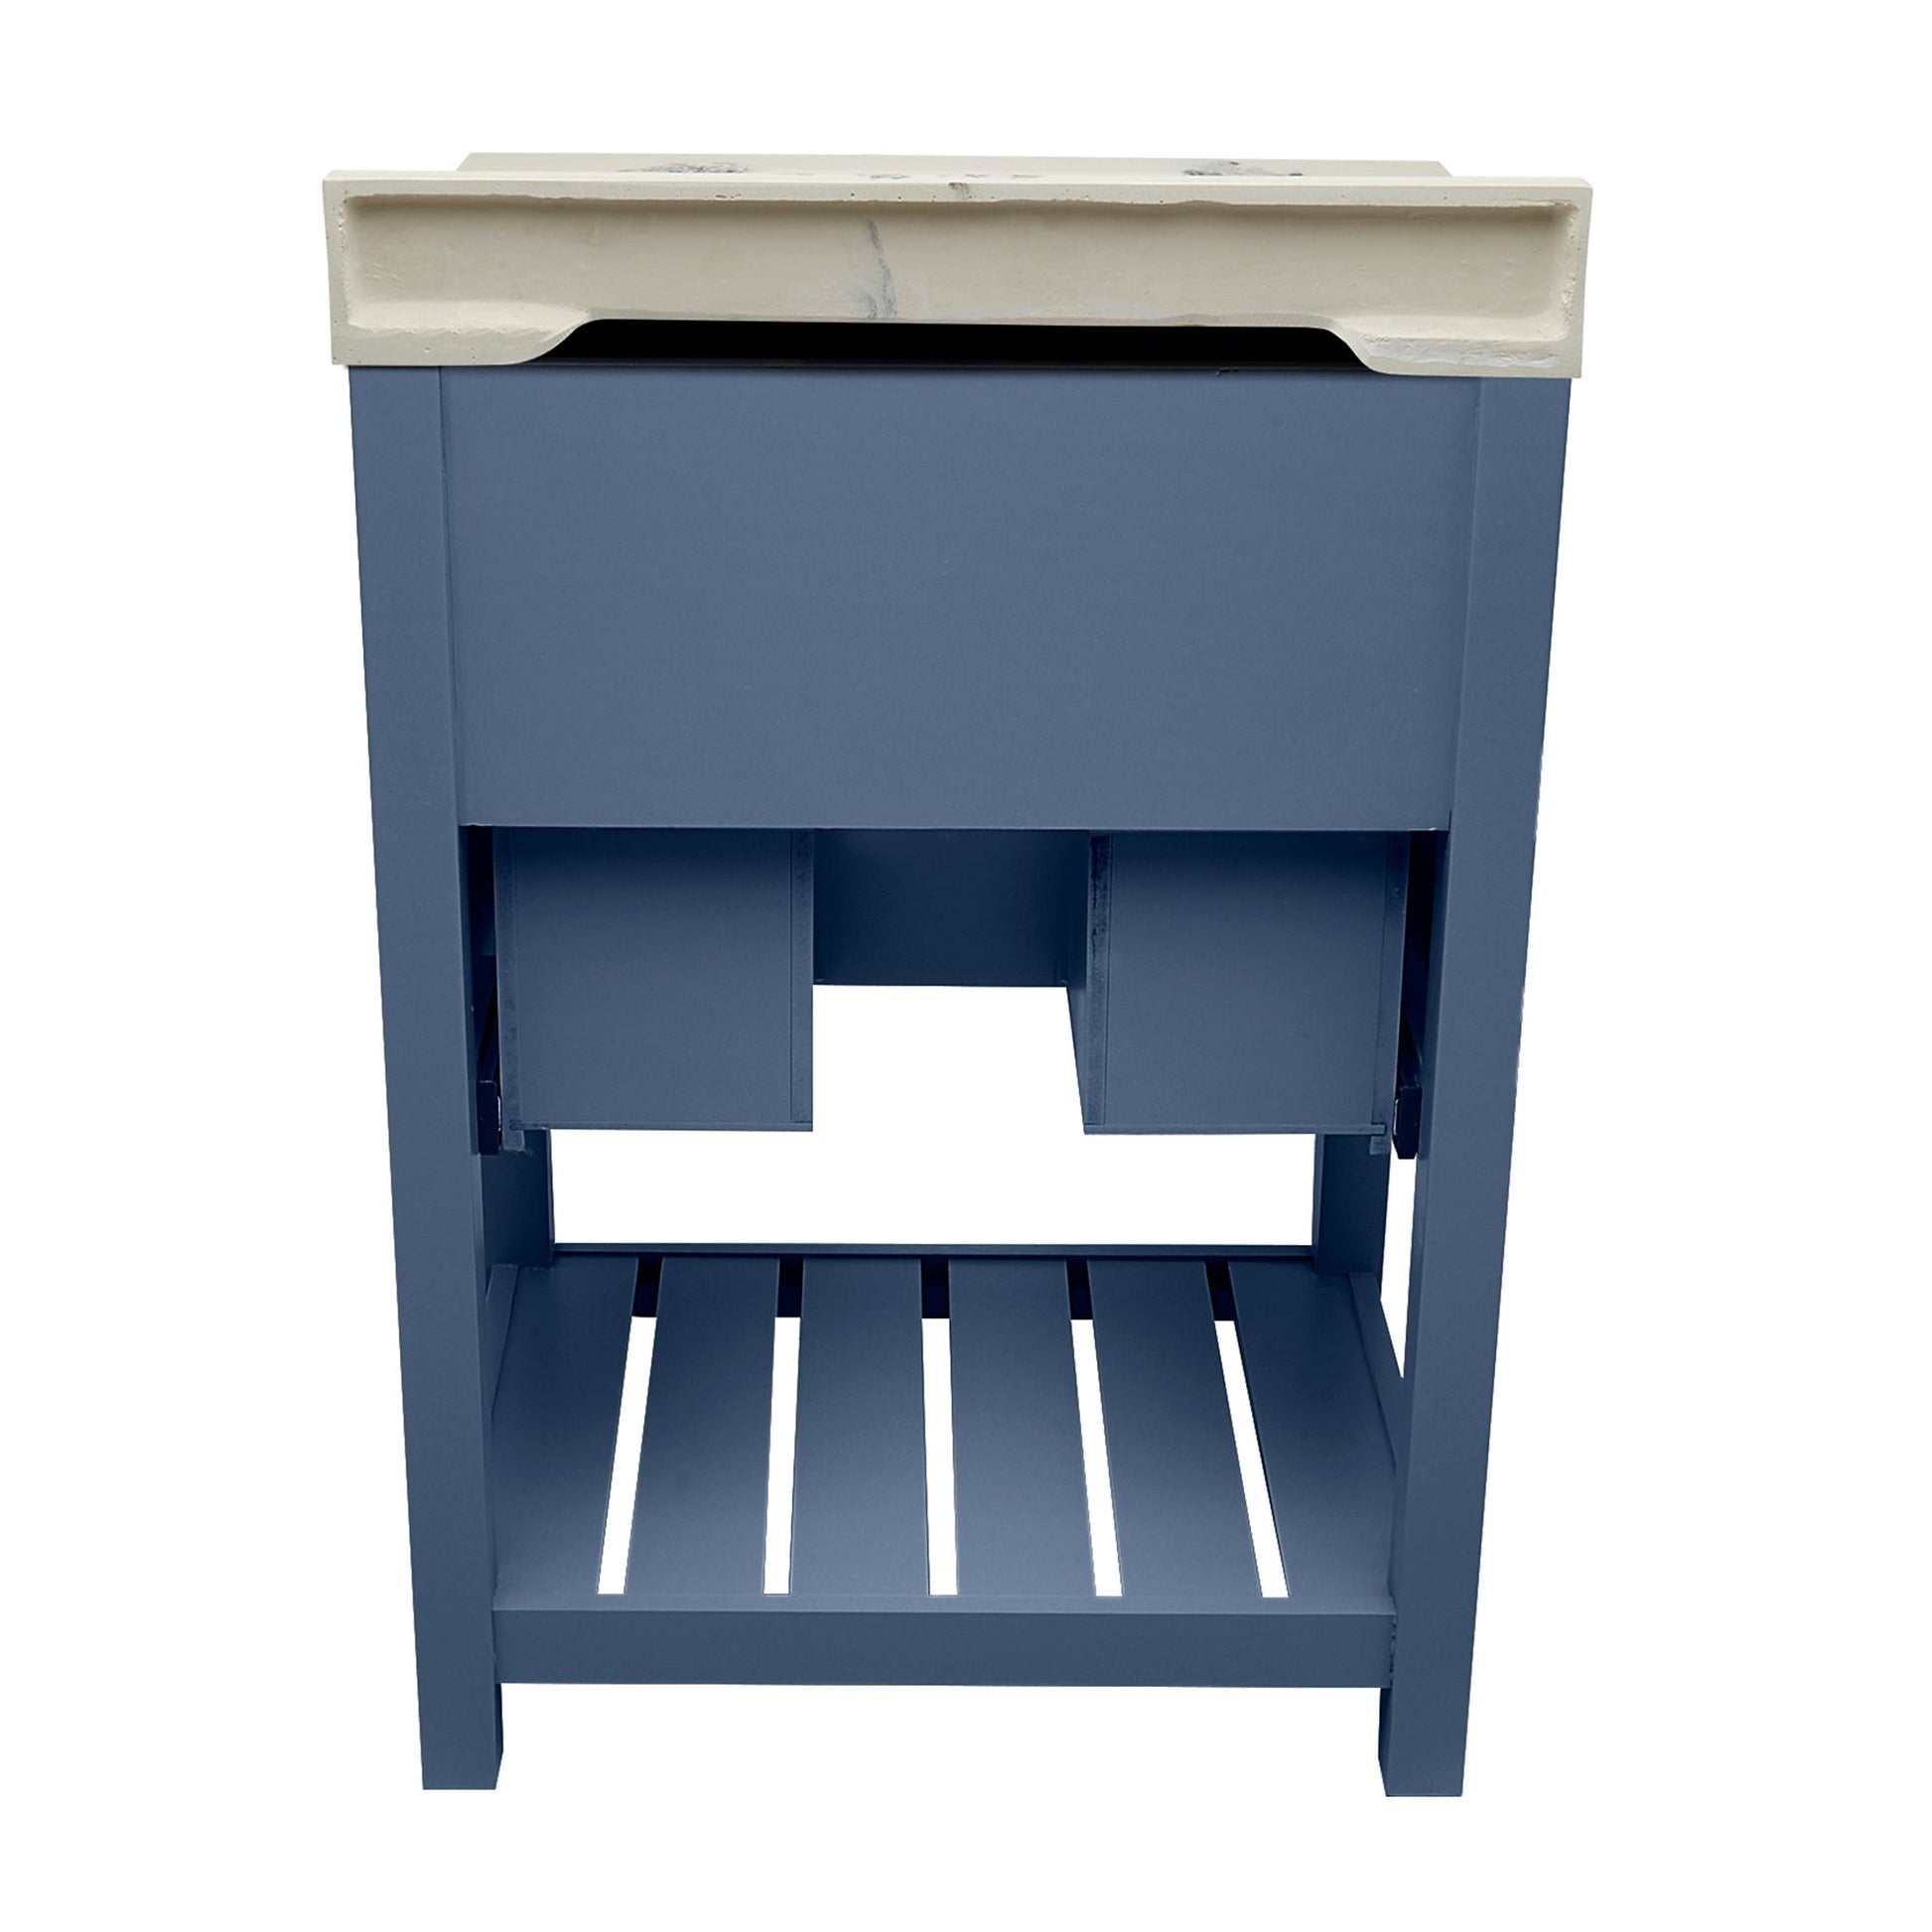 Ella's Bubbles Tremblant 25" Navy Blue Bathroom Vanity With Carrara White Cultured Marble Top With Backsplash and Sink